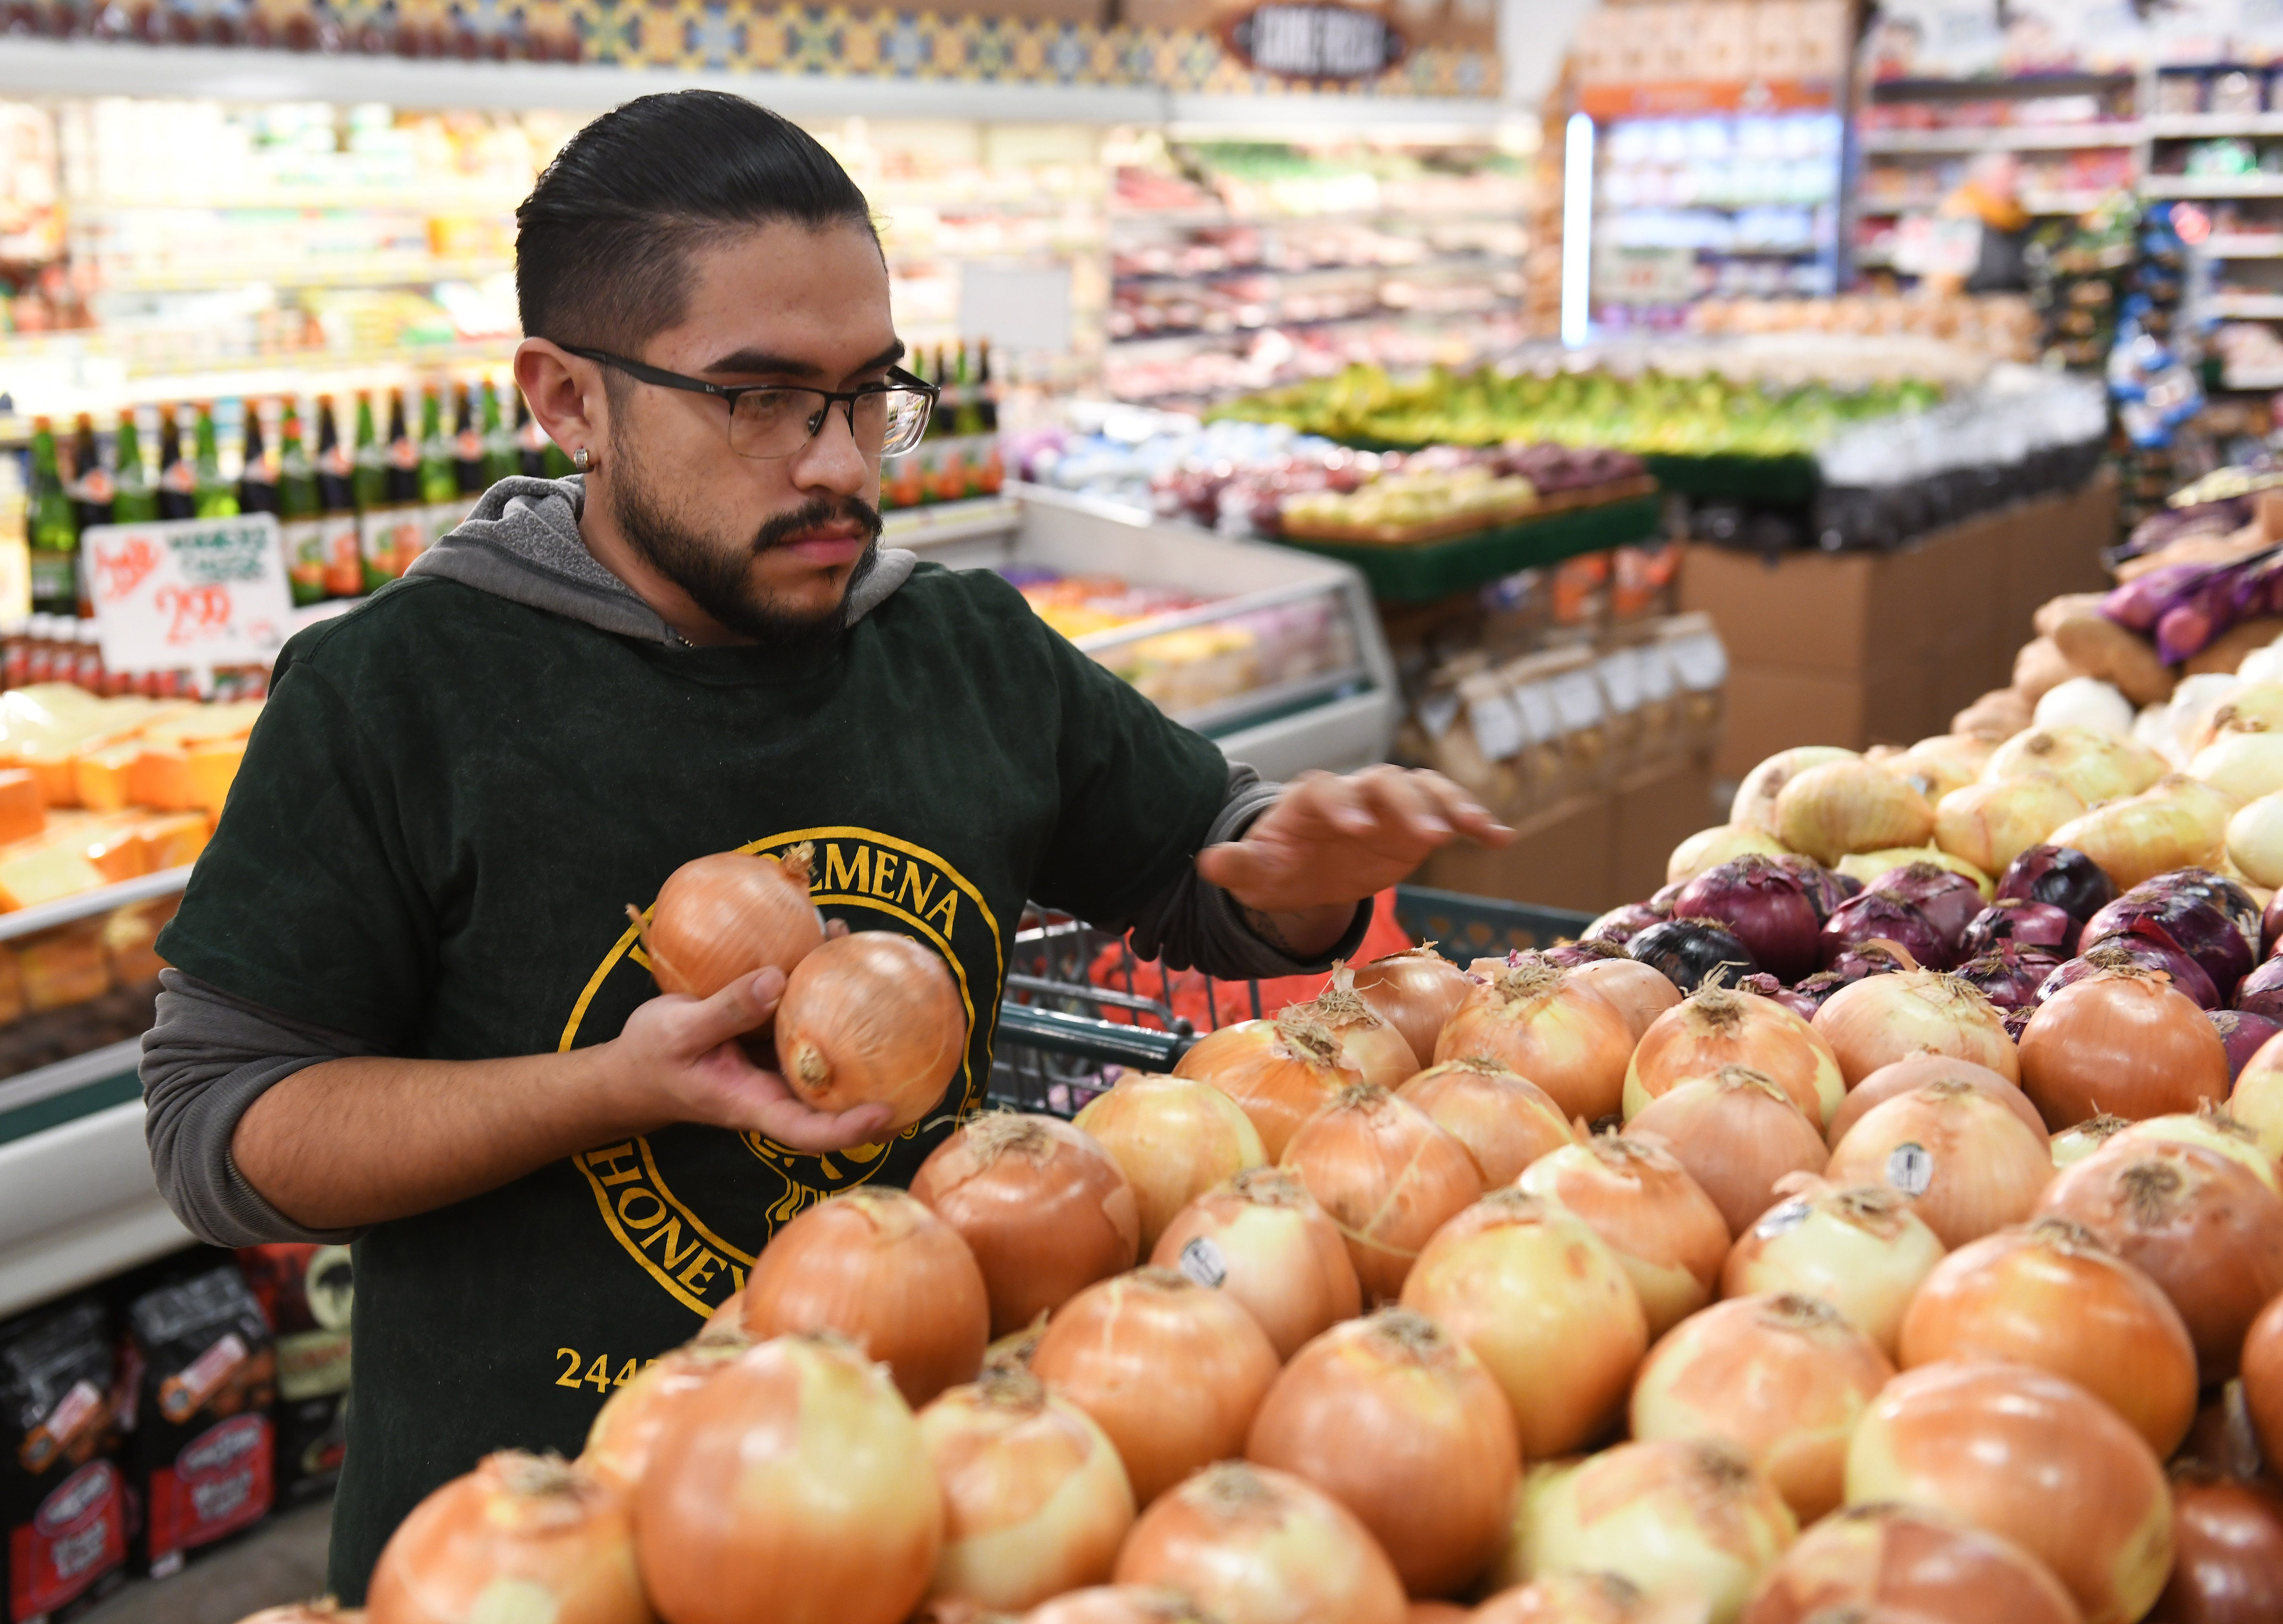 Luis Nino, 21, of Detroit, stocks produce at Honey Bee Market in Detroit on Thursday. The manager says they are hiring for the holiday season.